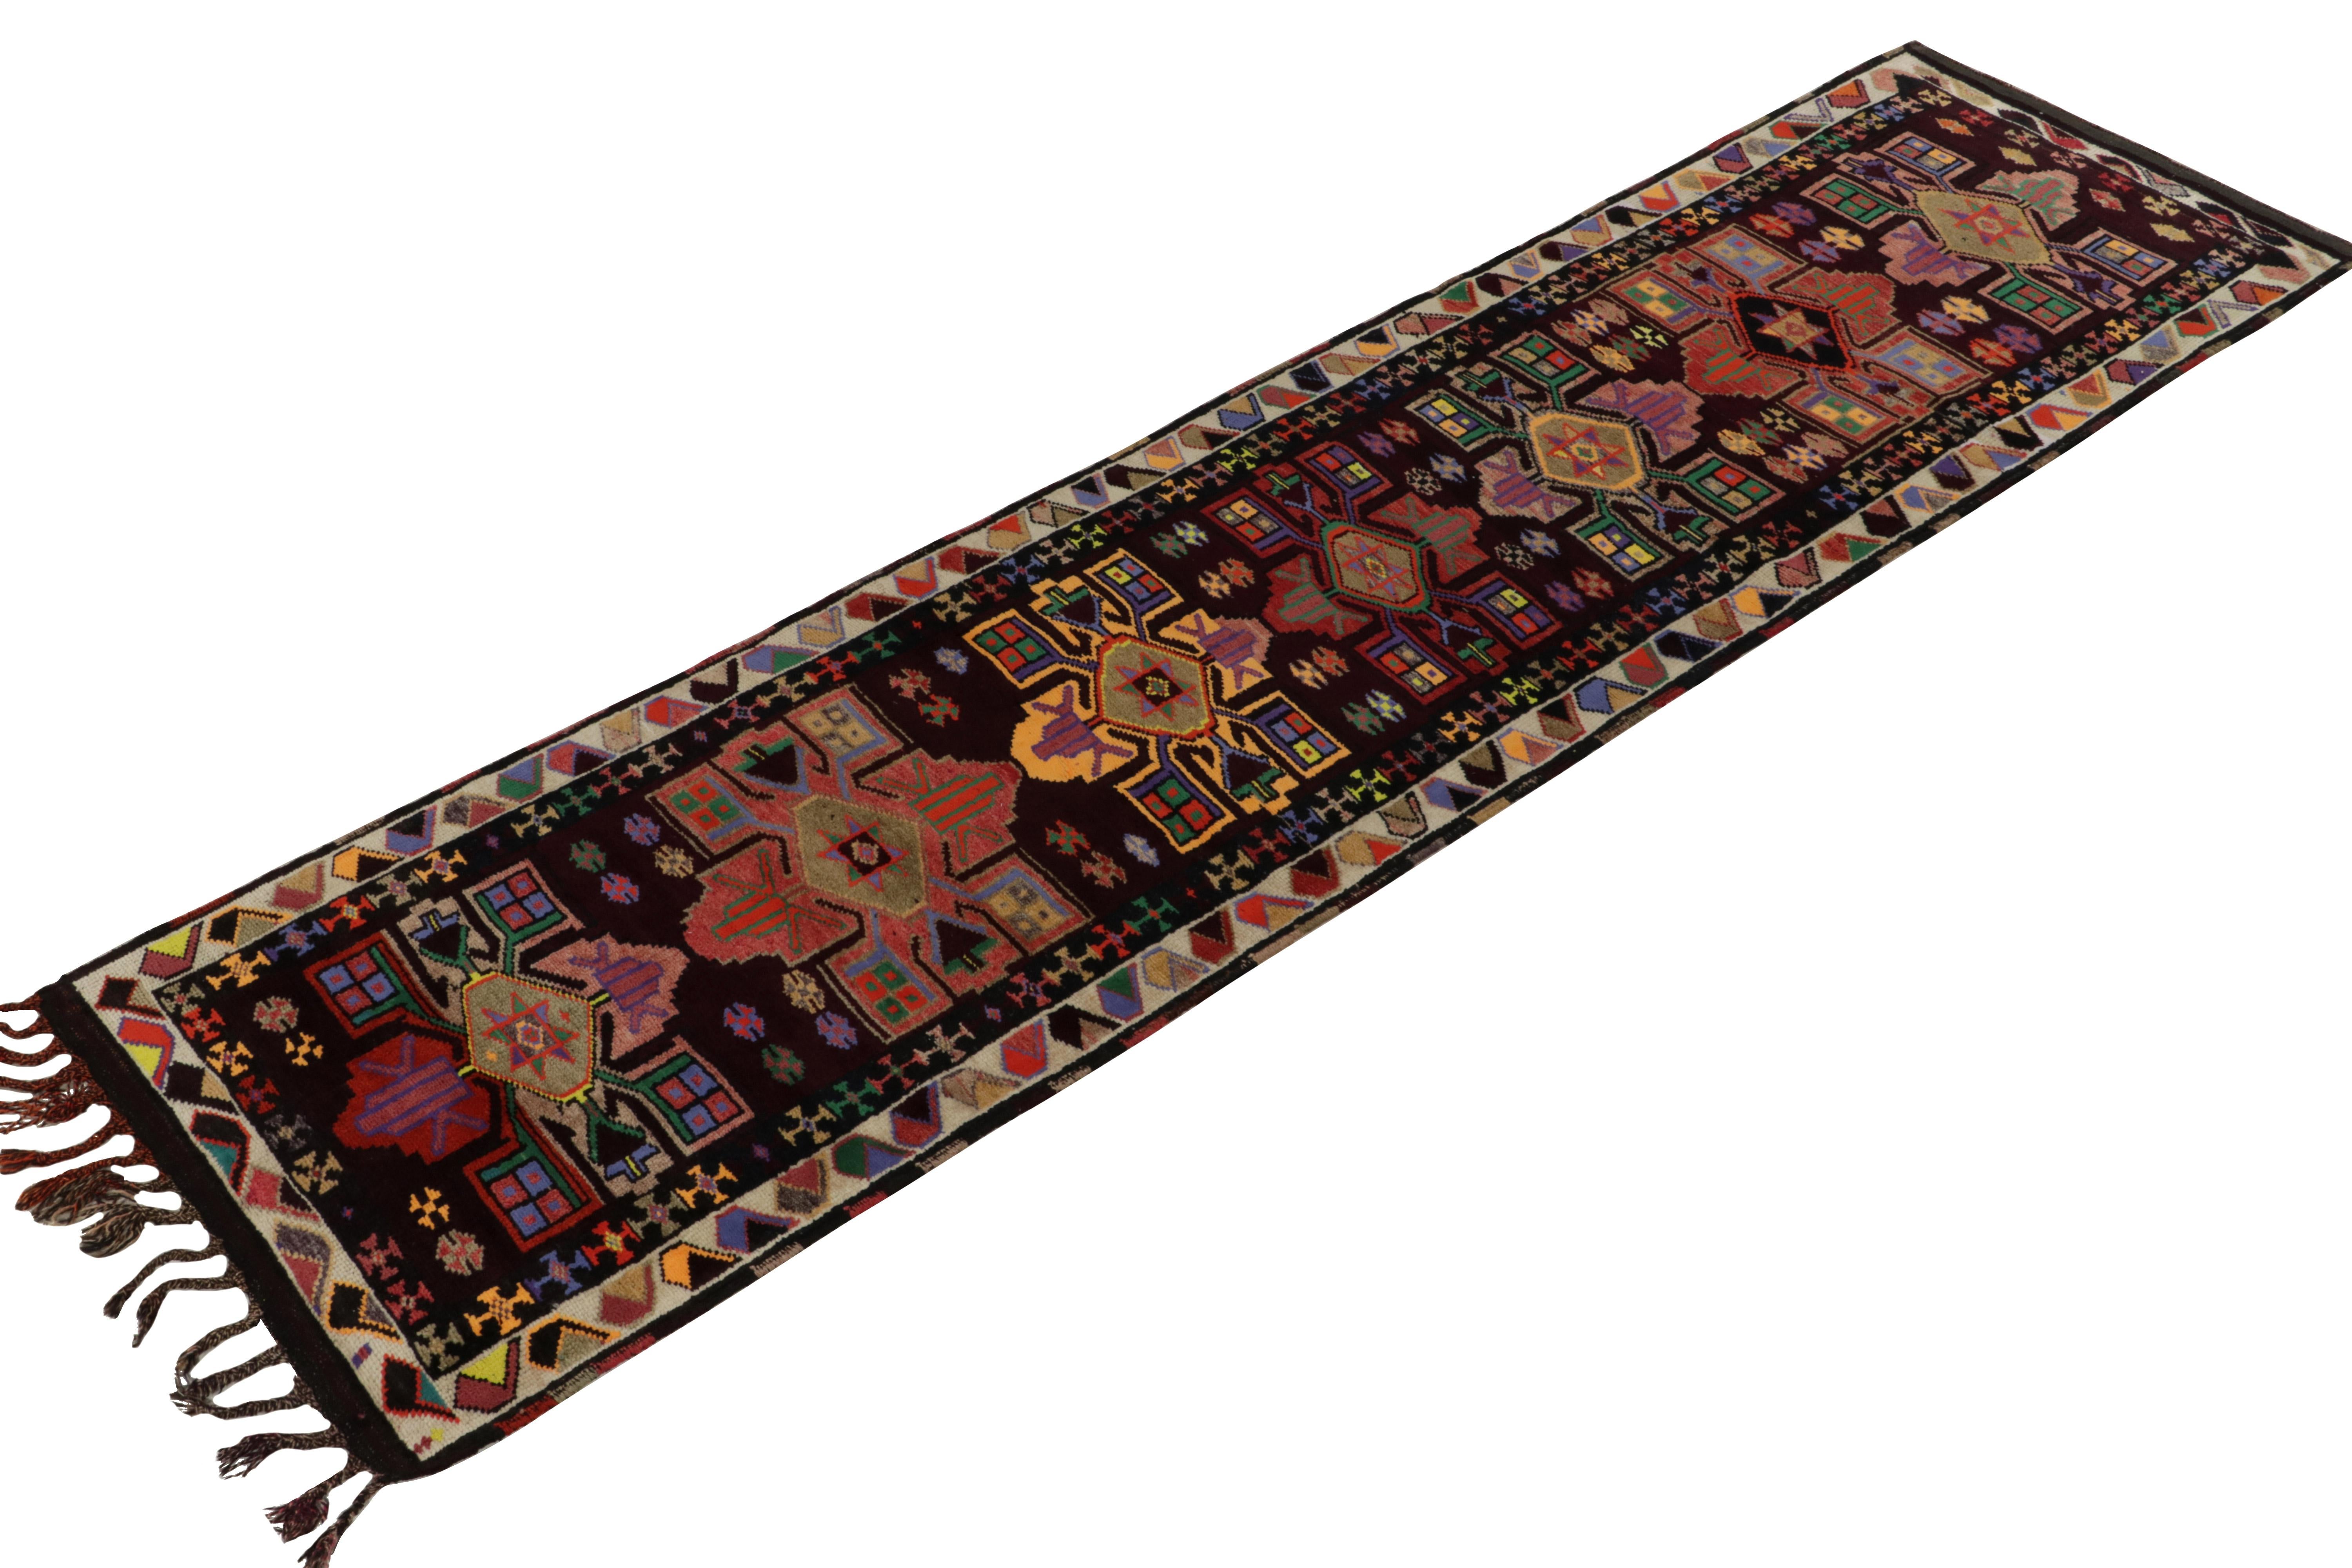 From R&K Principal Josh Nazmiyal’s rare acquisitions, a distinguished 3x12 vintage runner originating from Turkey circa 1950-1960.

On the Design: Geometric patterns and tribal medallions enjoy a vibrant sense of movement atop a black background